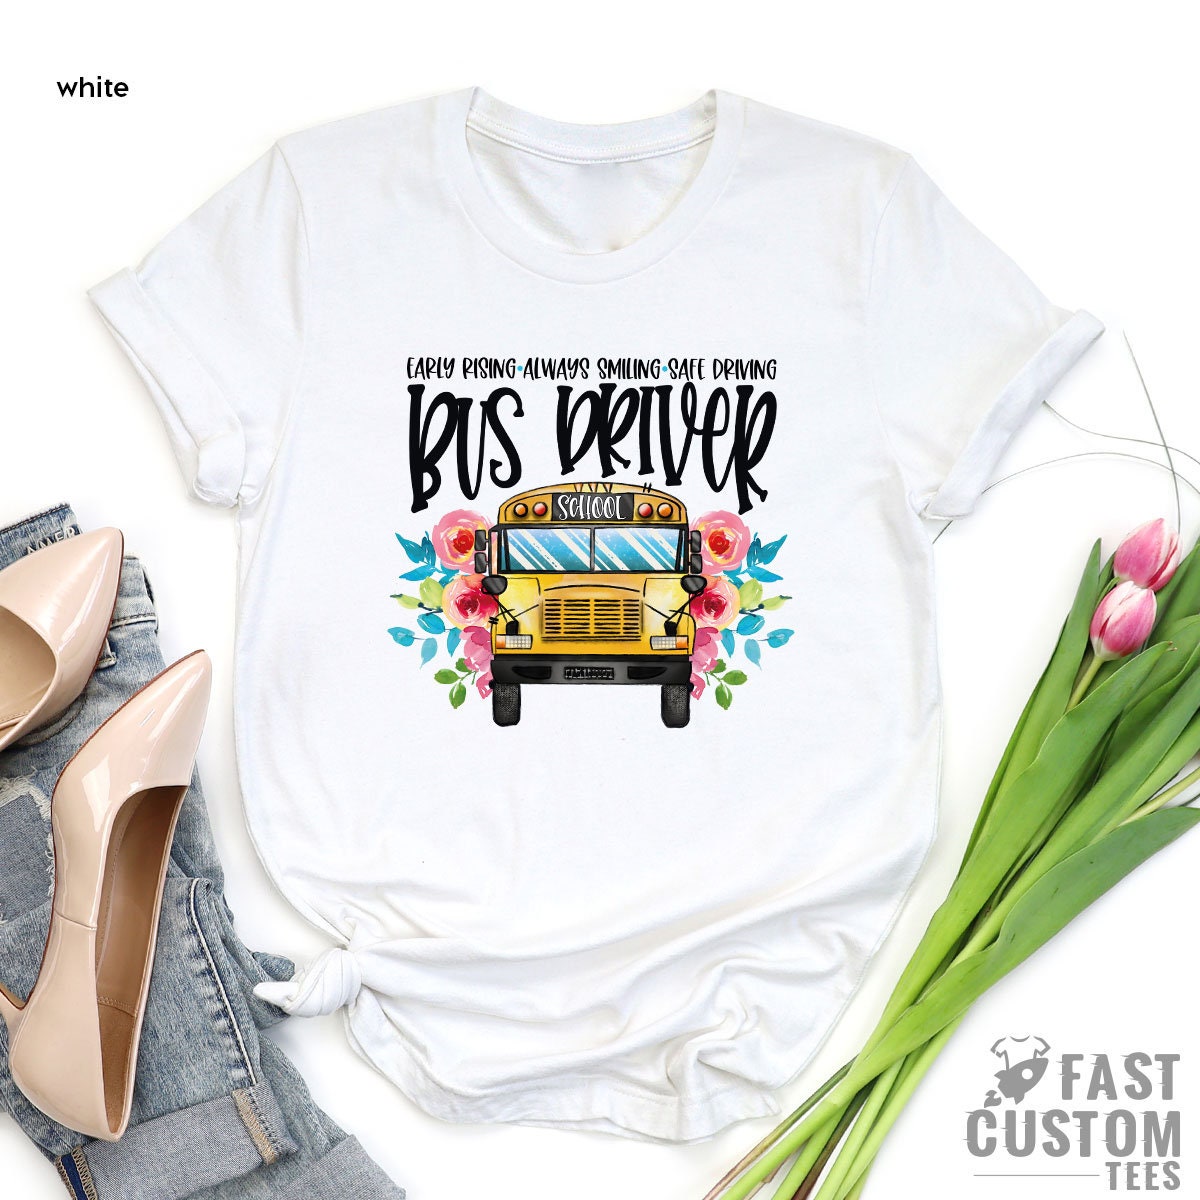 School Bus Driver Shirt, Early Rising Always Smiling Safe Driving T-Shirt, Shirts For Bus Drivers, Favorite Bus Driver Gift - Fastdeliverytees.com